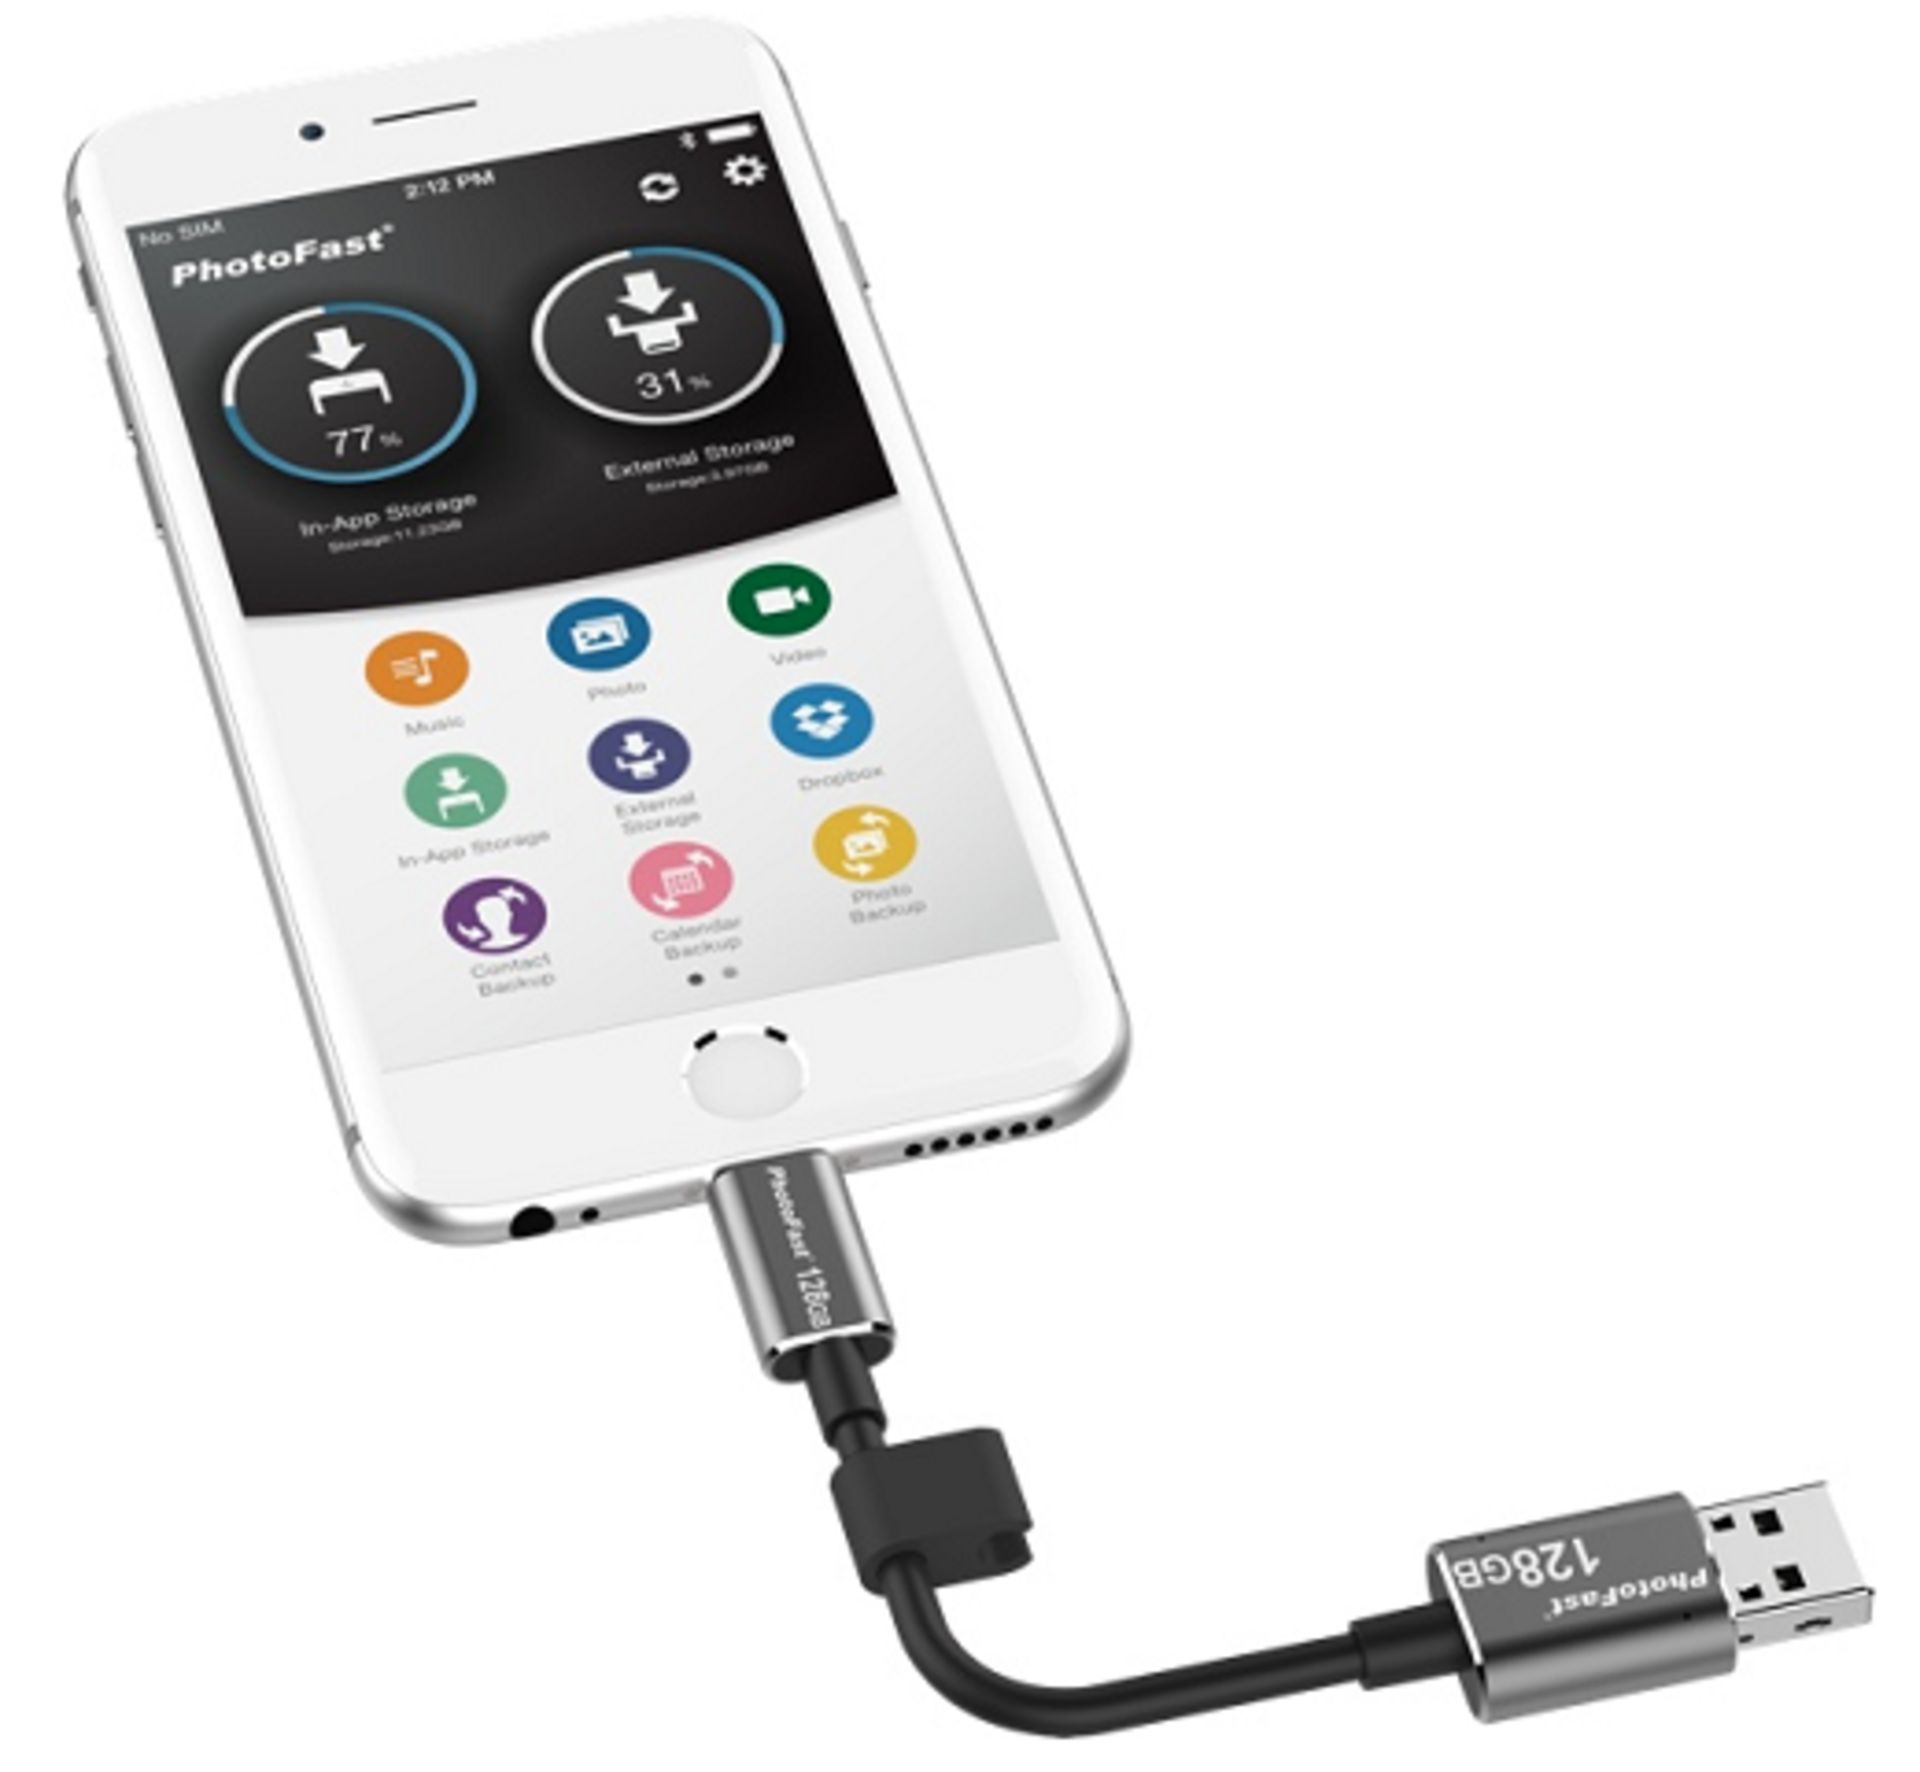 MemoryCable stores up to 128GB of content fro your iPhone 2